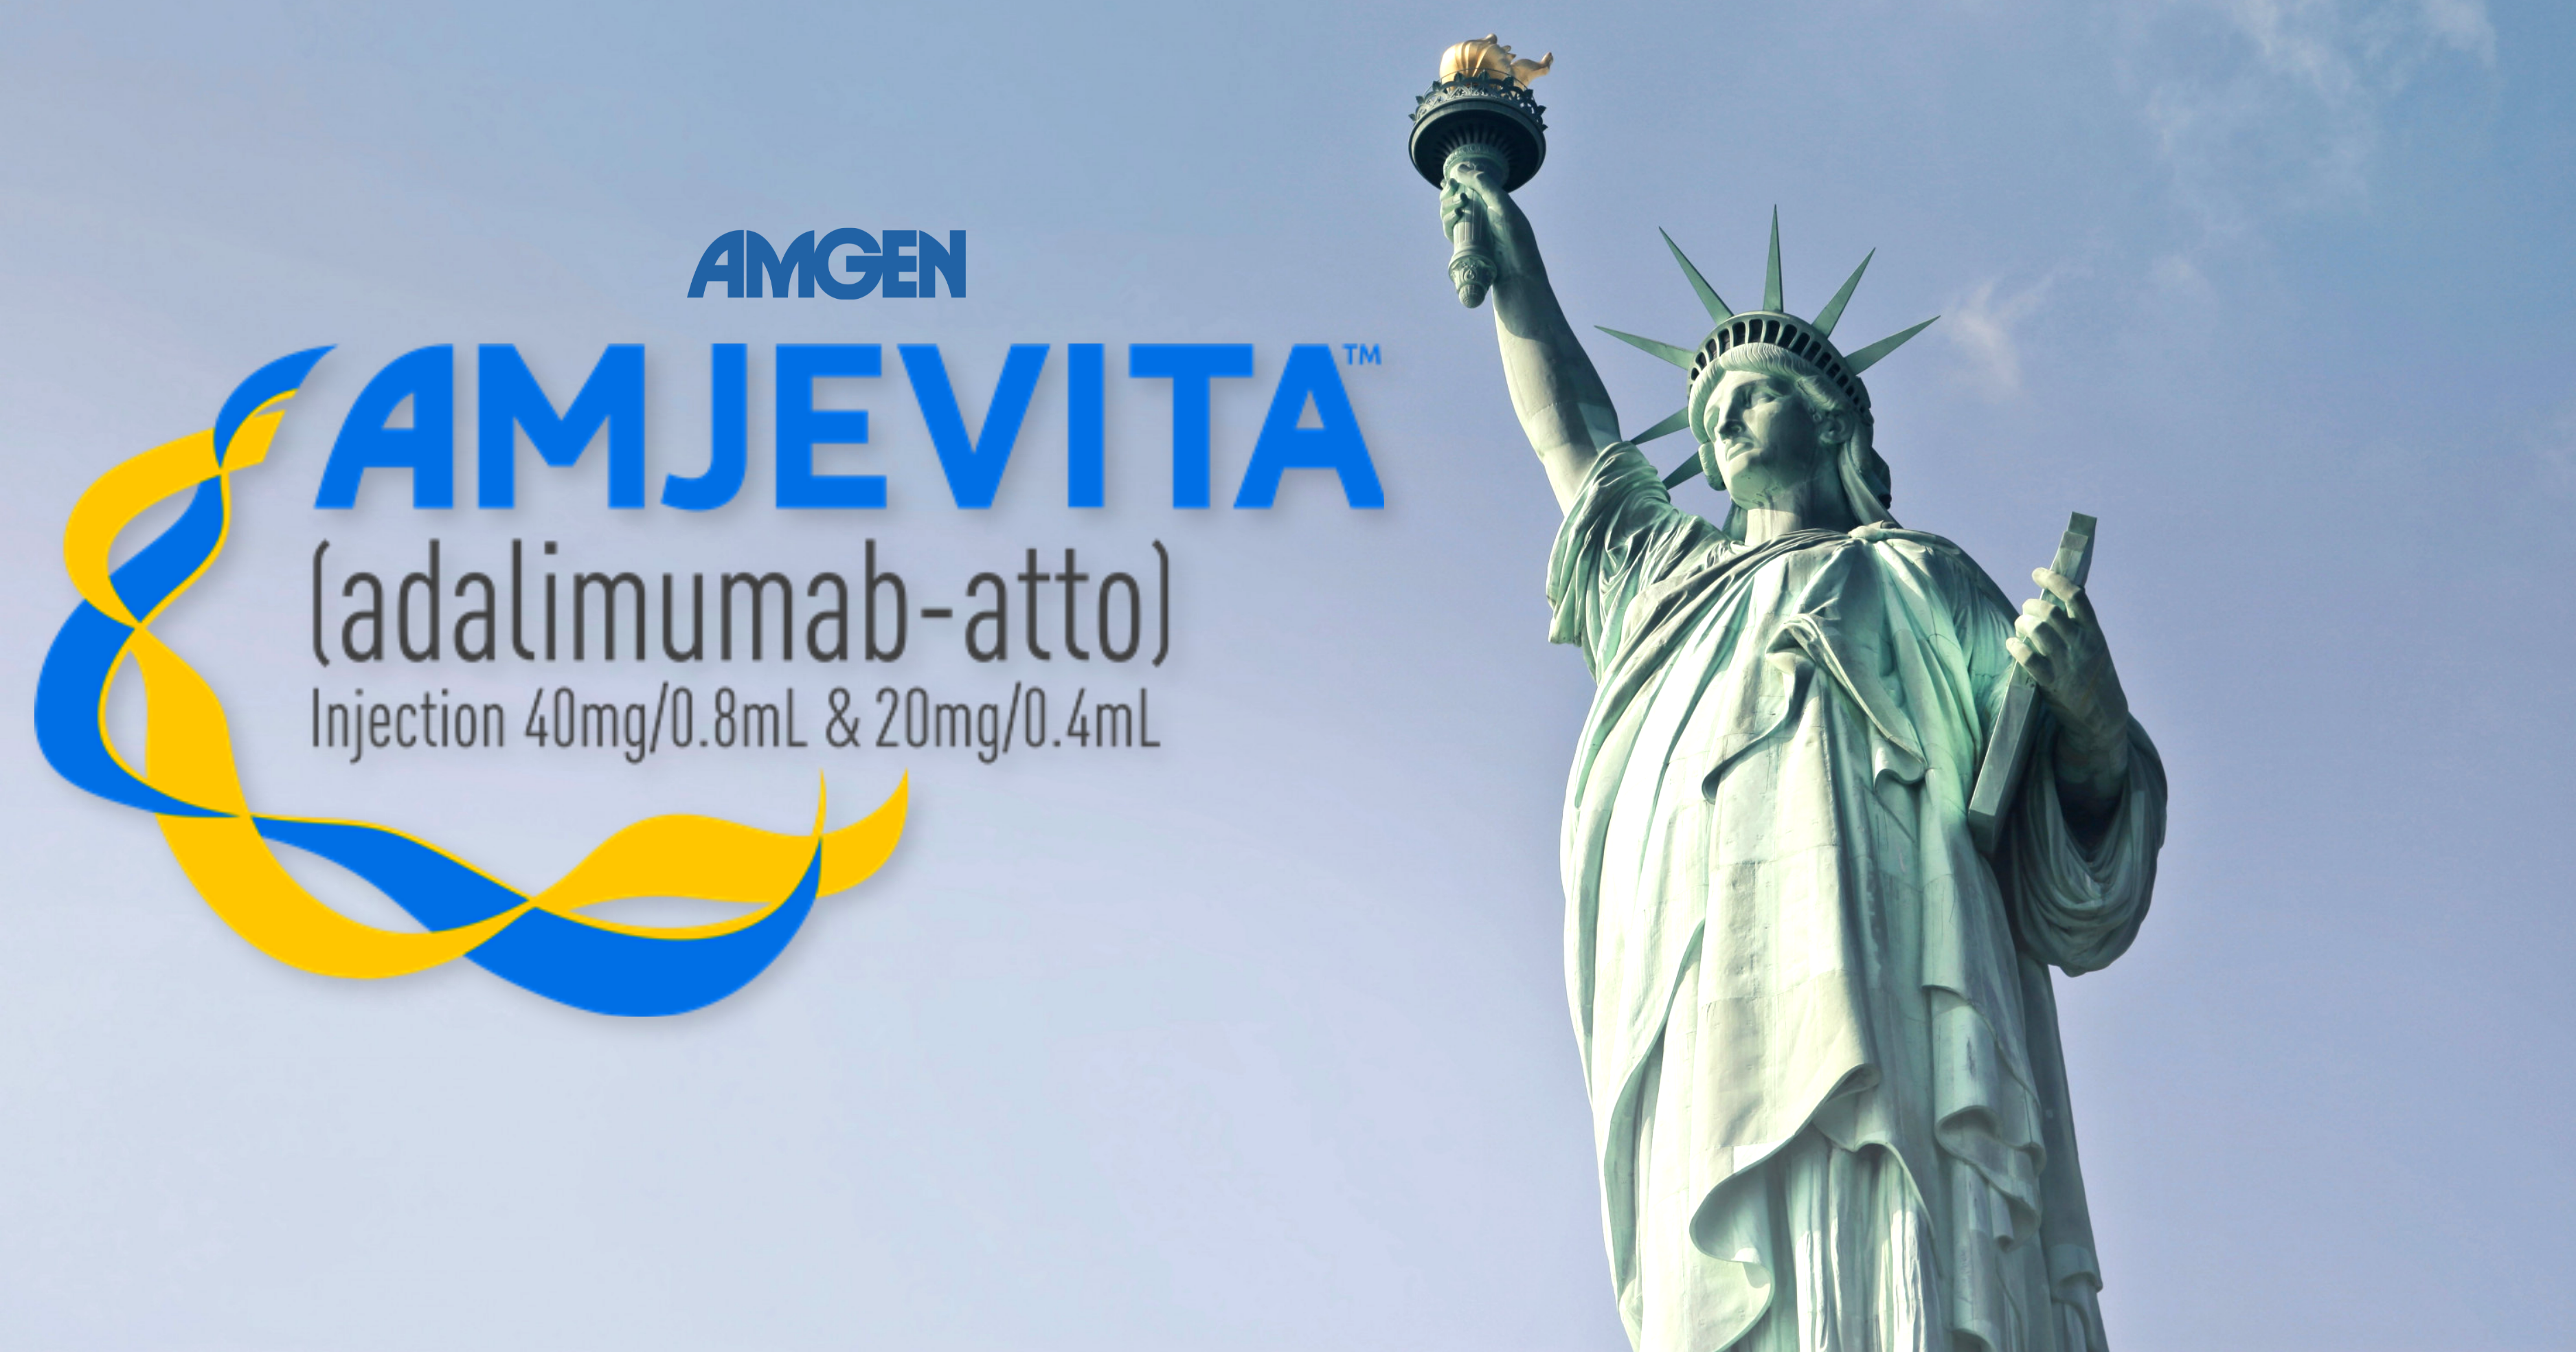 Amjevita and Amgen logos with Statue of Liberty